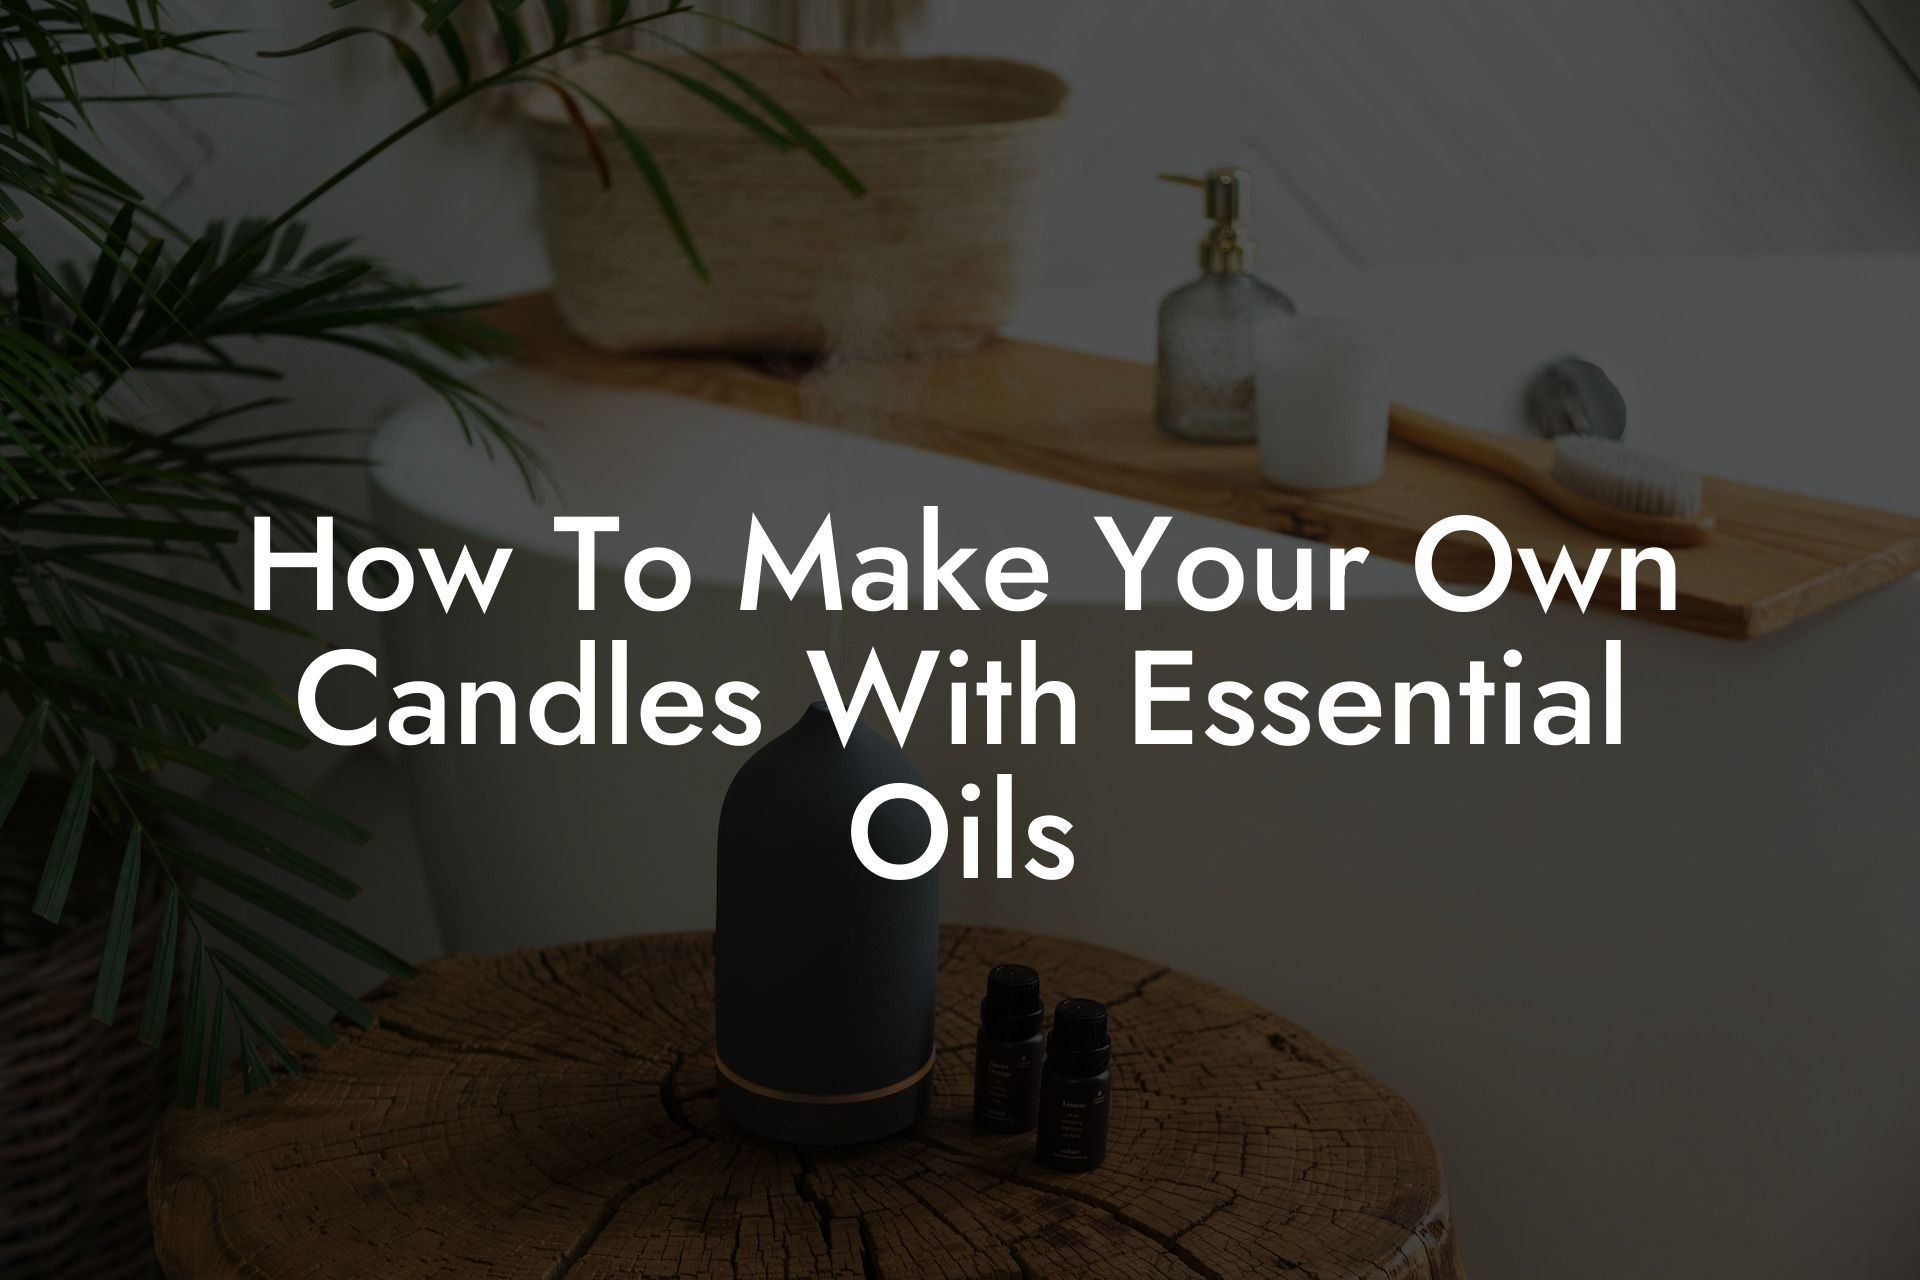 How To Make Your Own Candles With Essential Oils